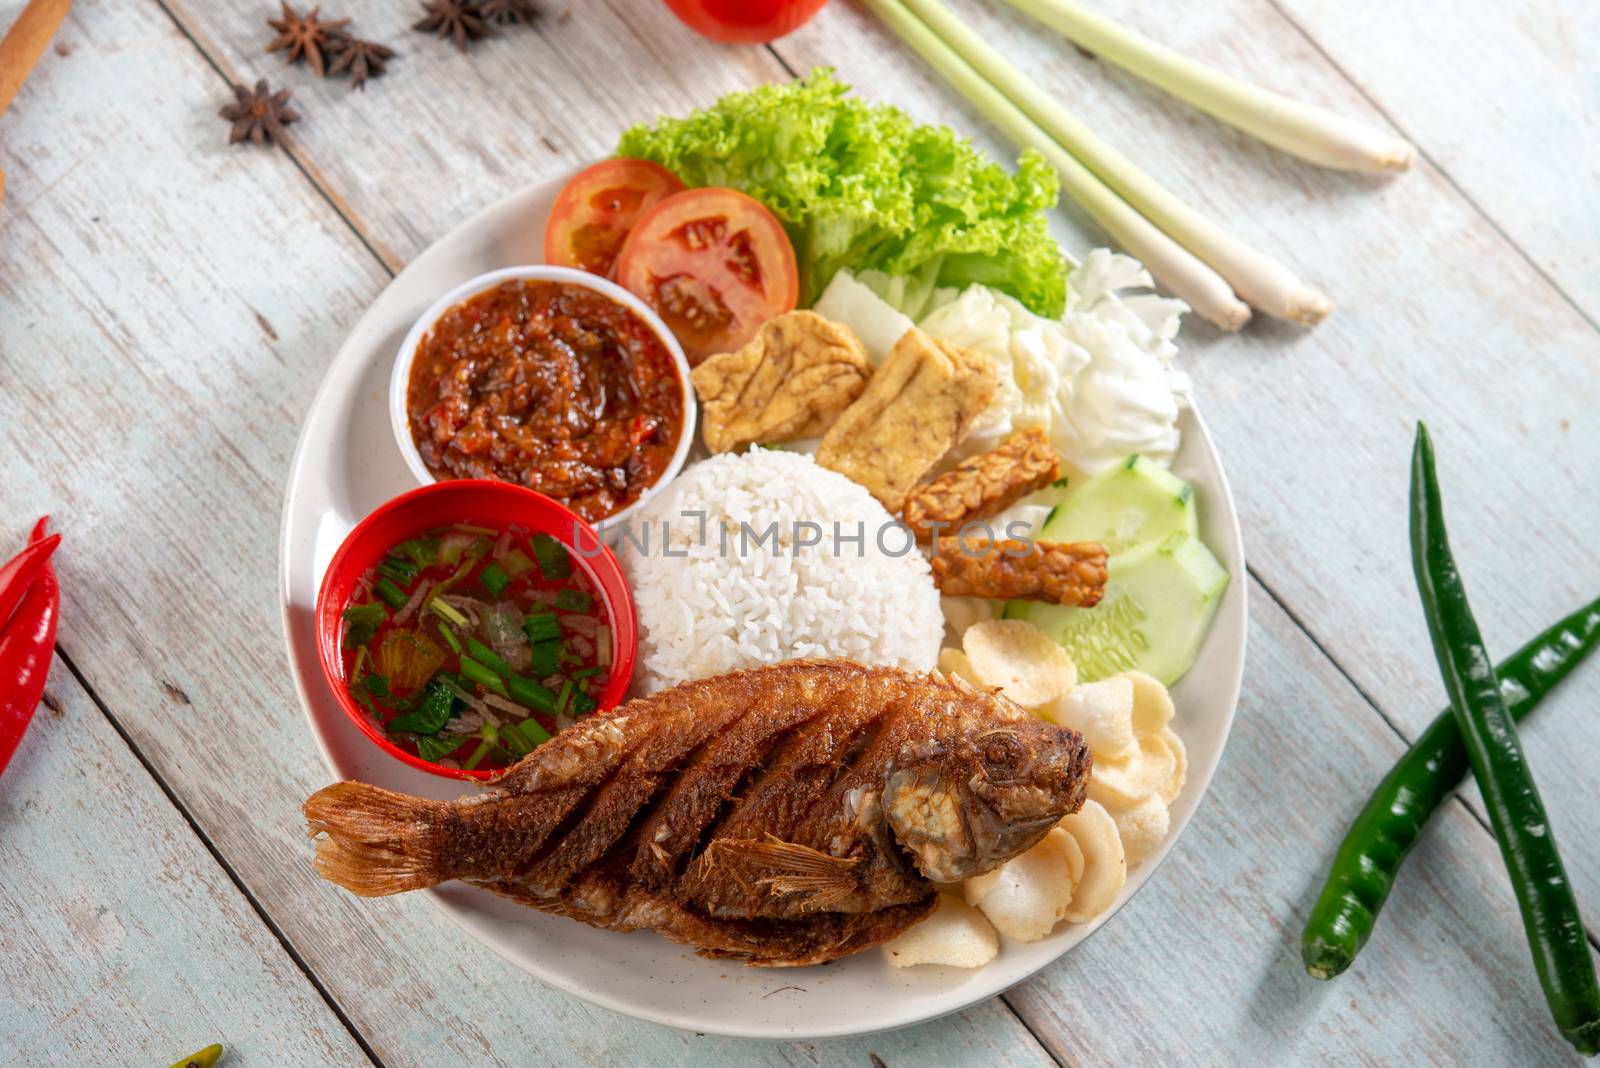 Fried tilapia fish and rice, popular traditional Malay or Indonesian local food. Flat lay top down overhead view.